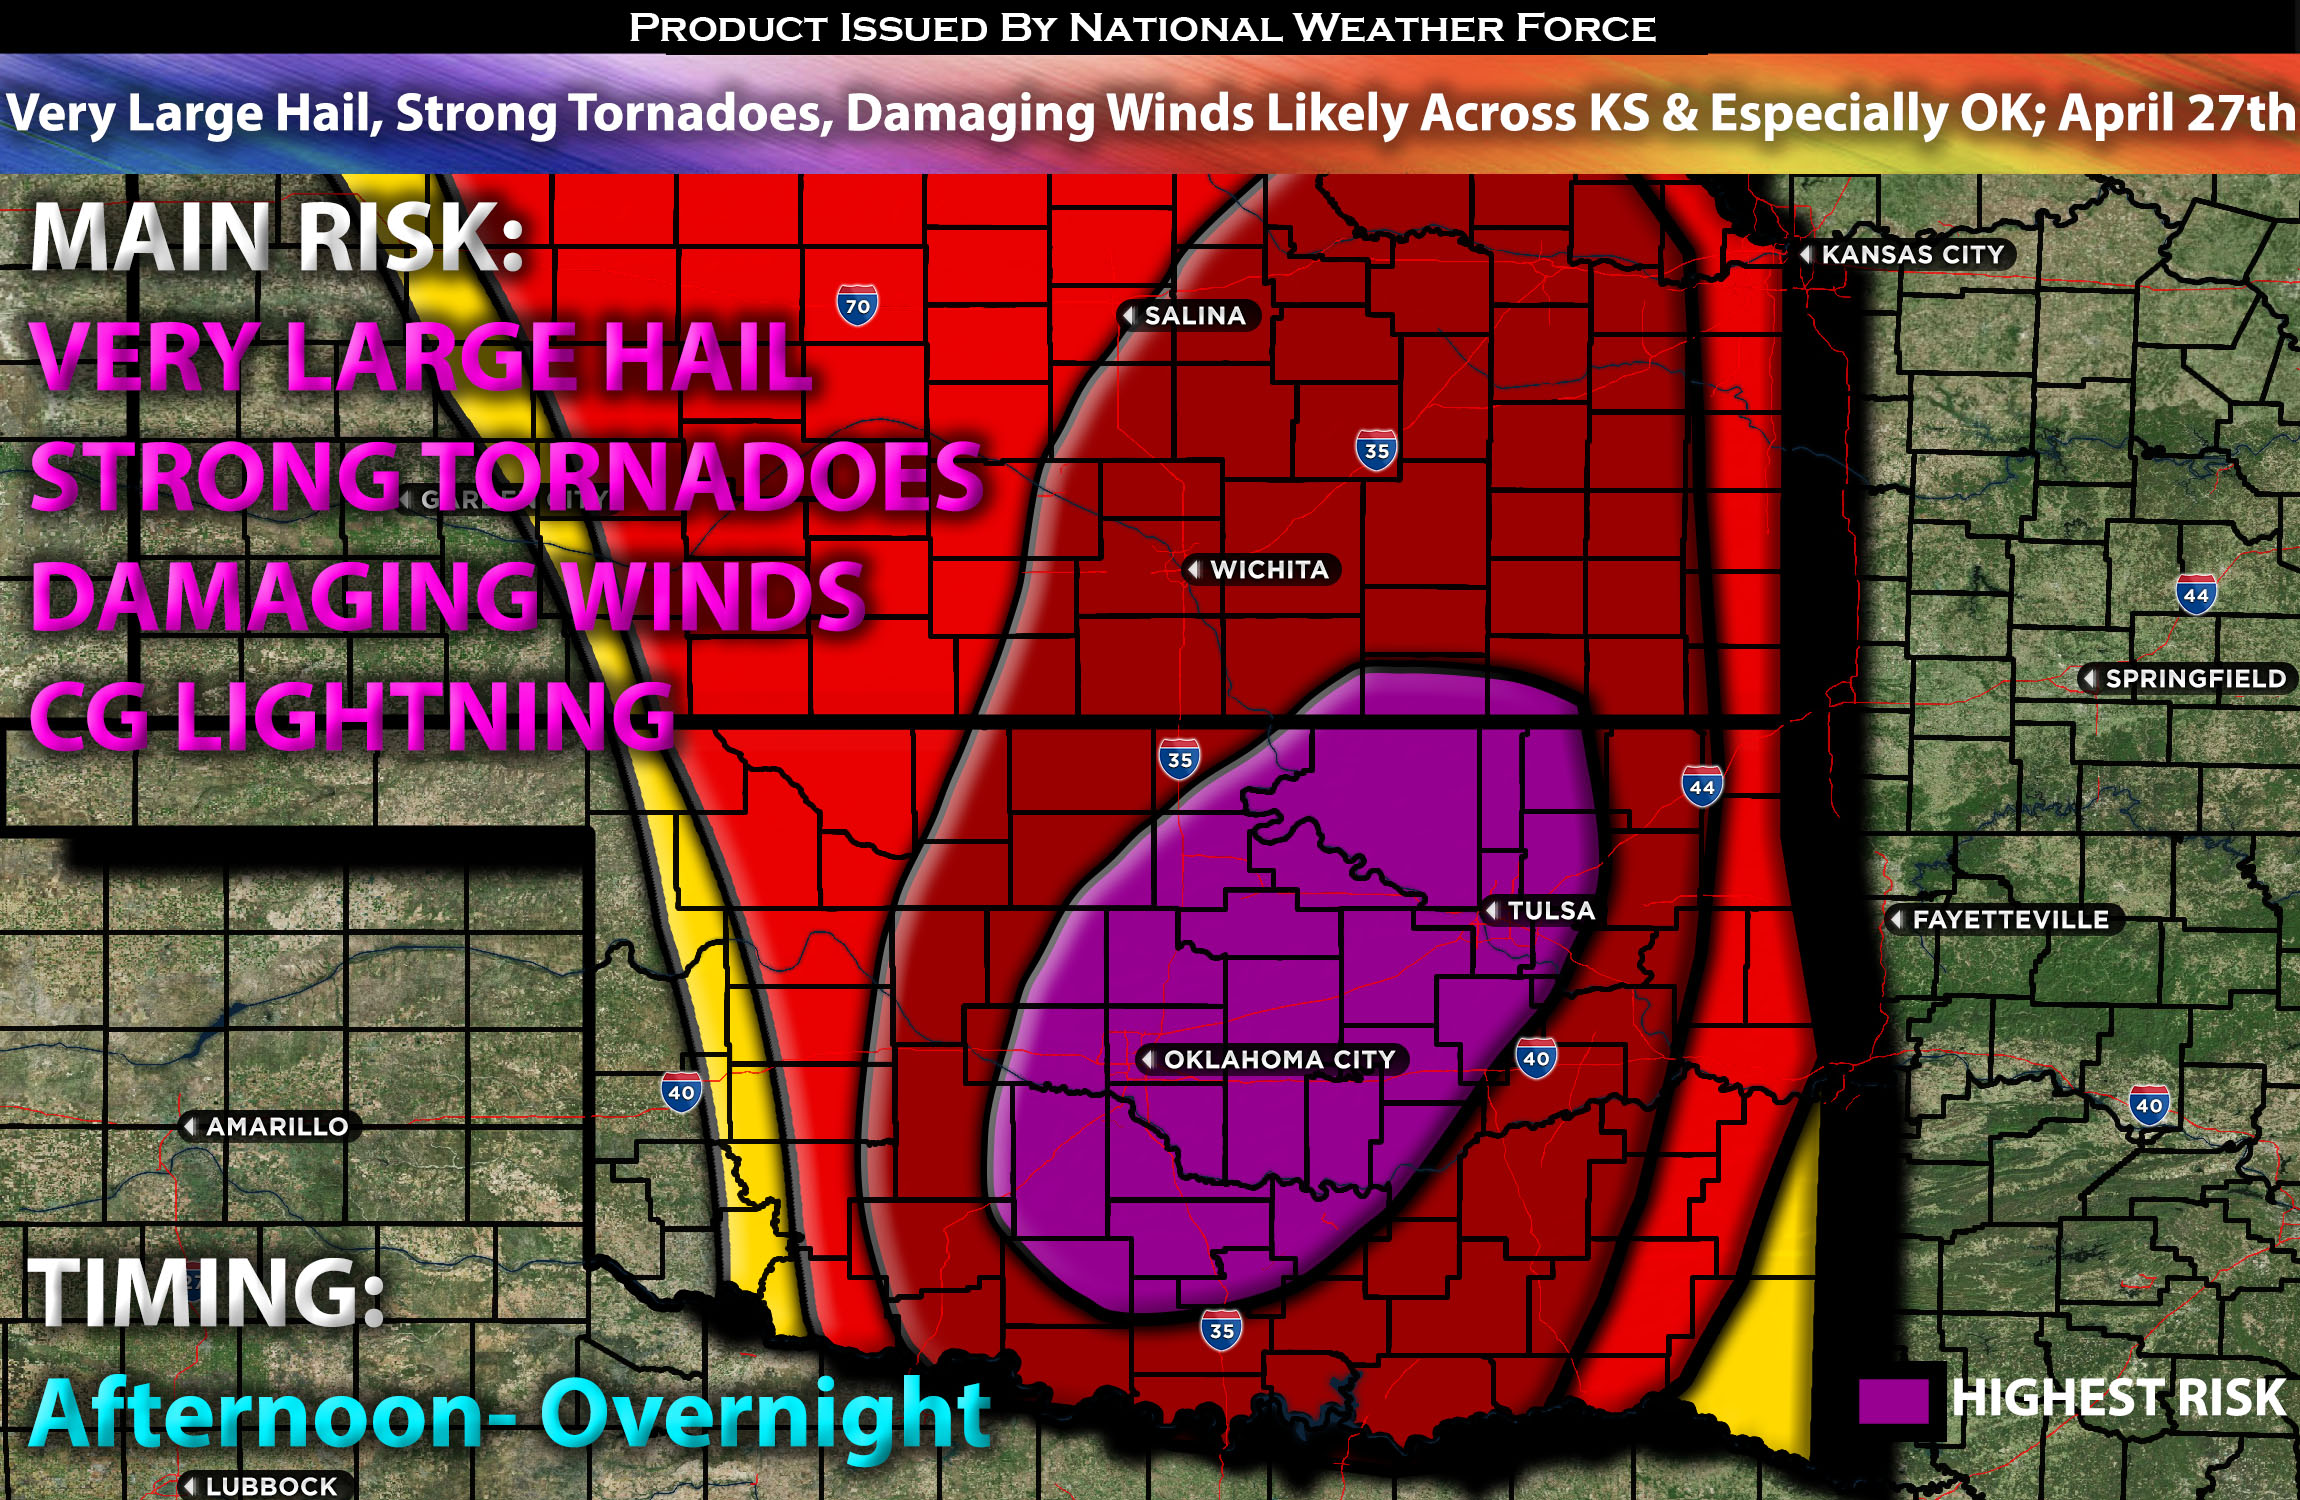 Very Large Hail, Strong Tornadoes, Damaging Winds Likely Across KS & Especially OK; April 27th